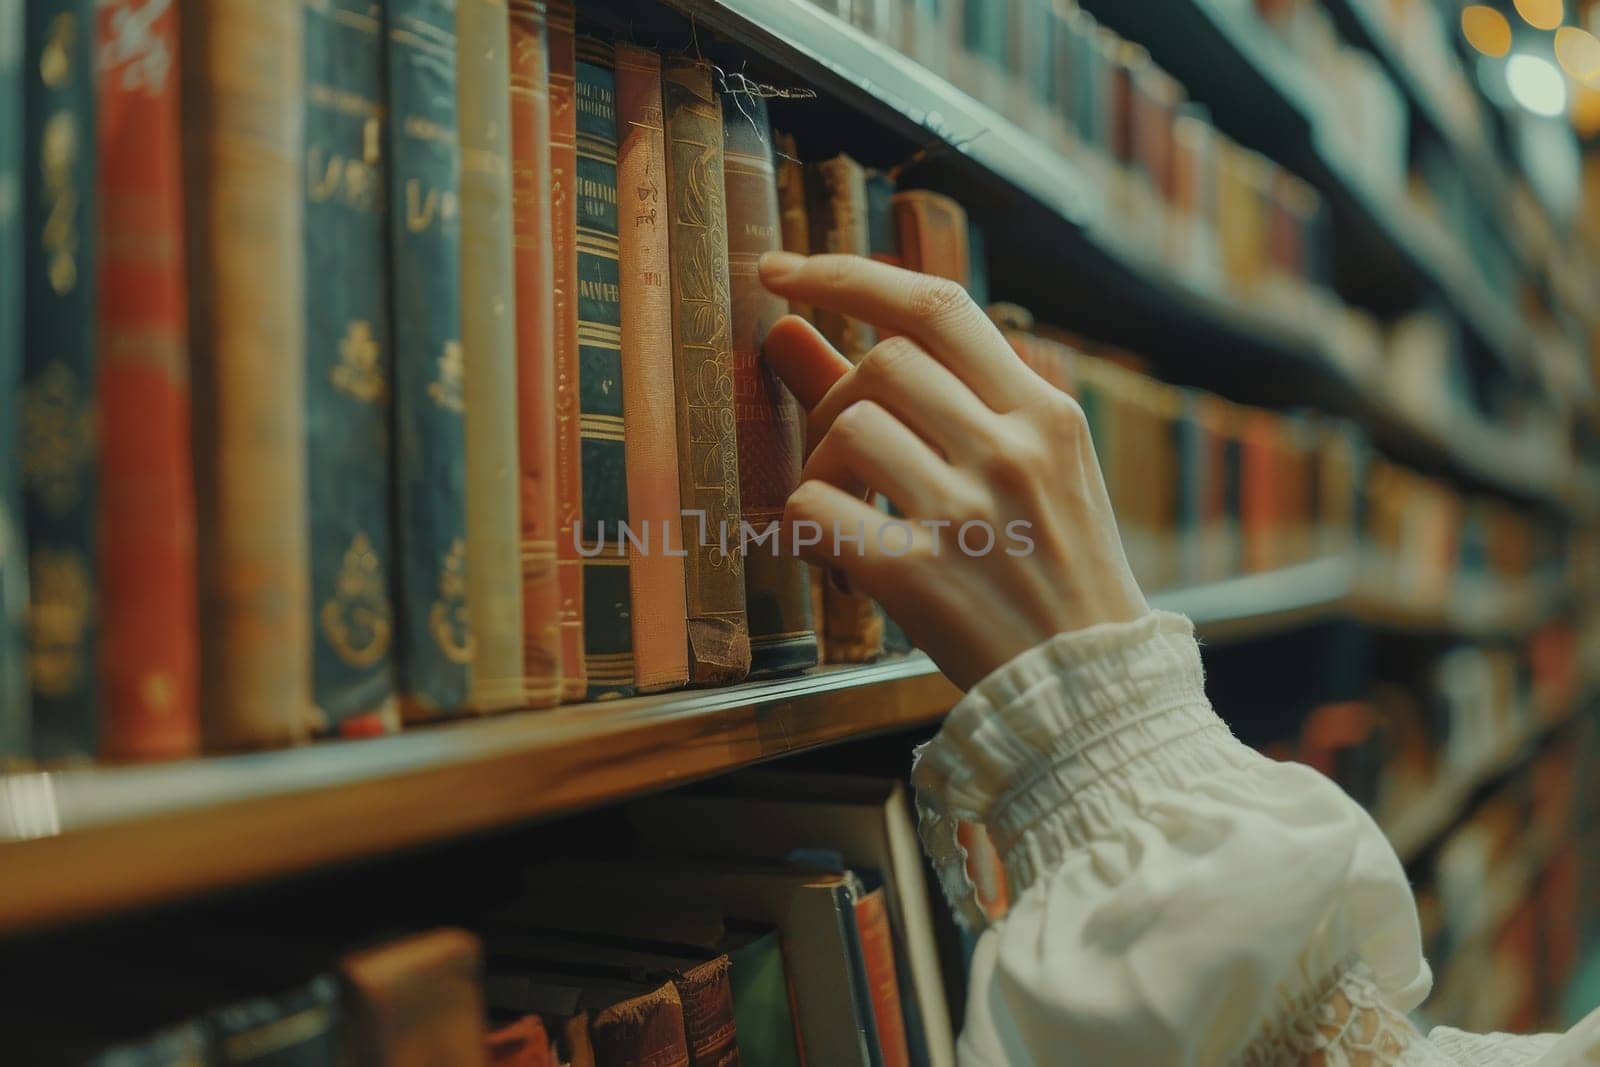 A person is reaching for a book on a shelf in a library. The books are arranged in rows and are of various sizes. The person appears to be interested in finding a specific book